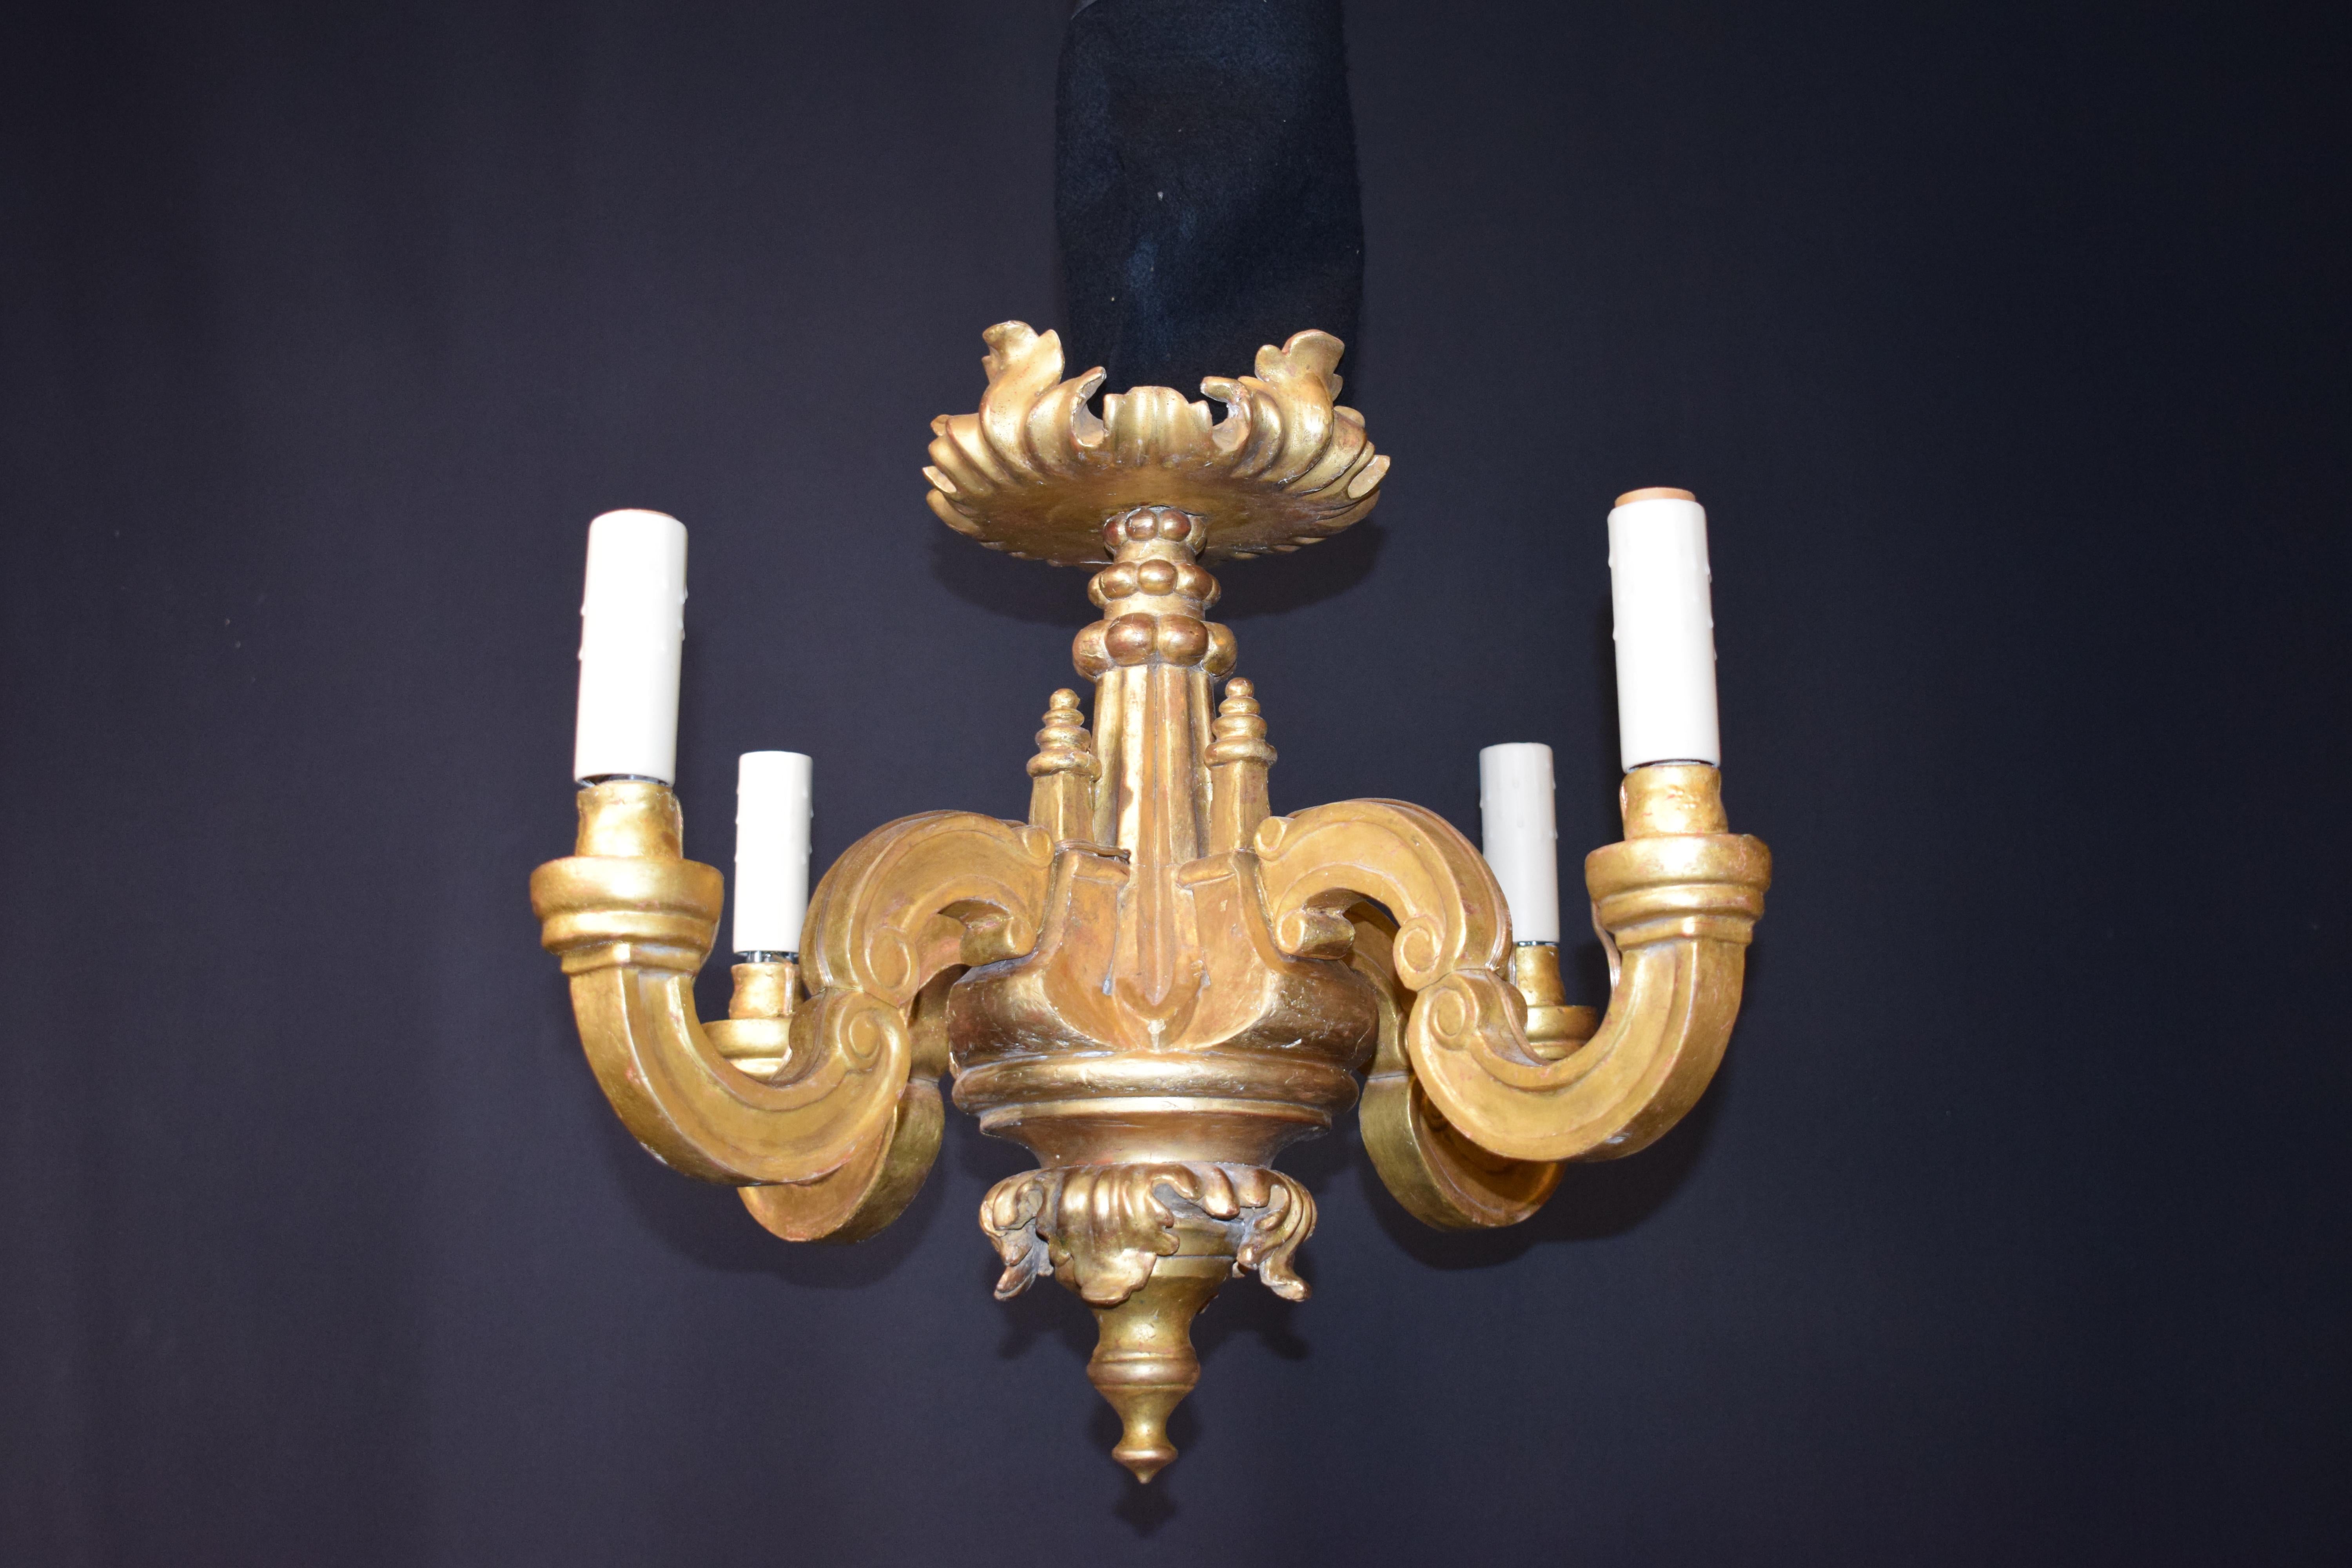 A very fine Louis XVI style carved and gilt wooden chandelier, original 24-karat gilding. Made for candles now electrified. 4-lights.
Dimensions: Height 19 1/2